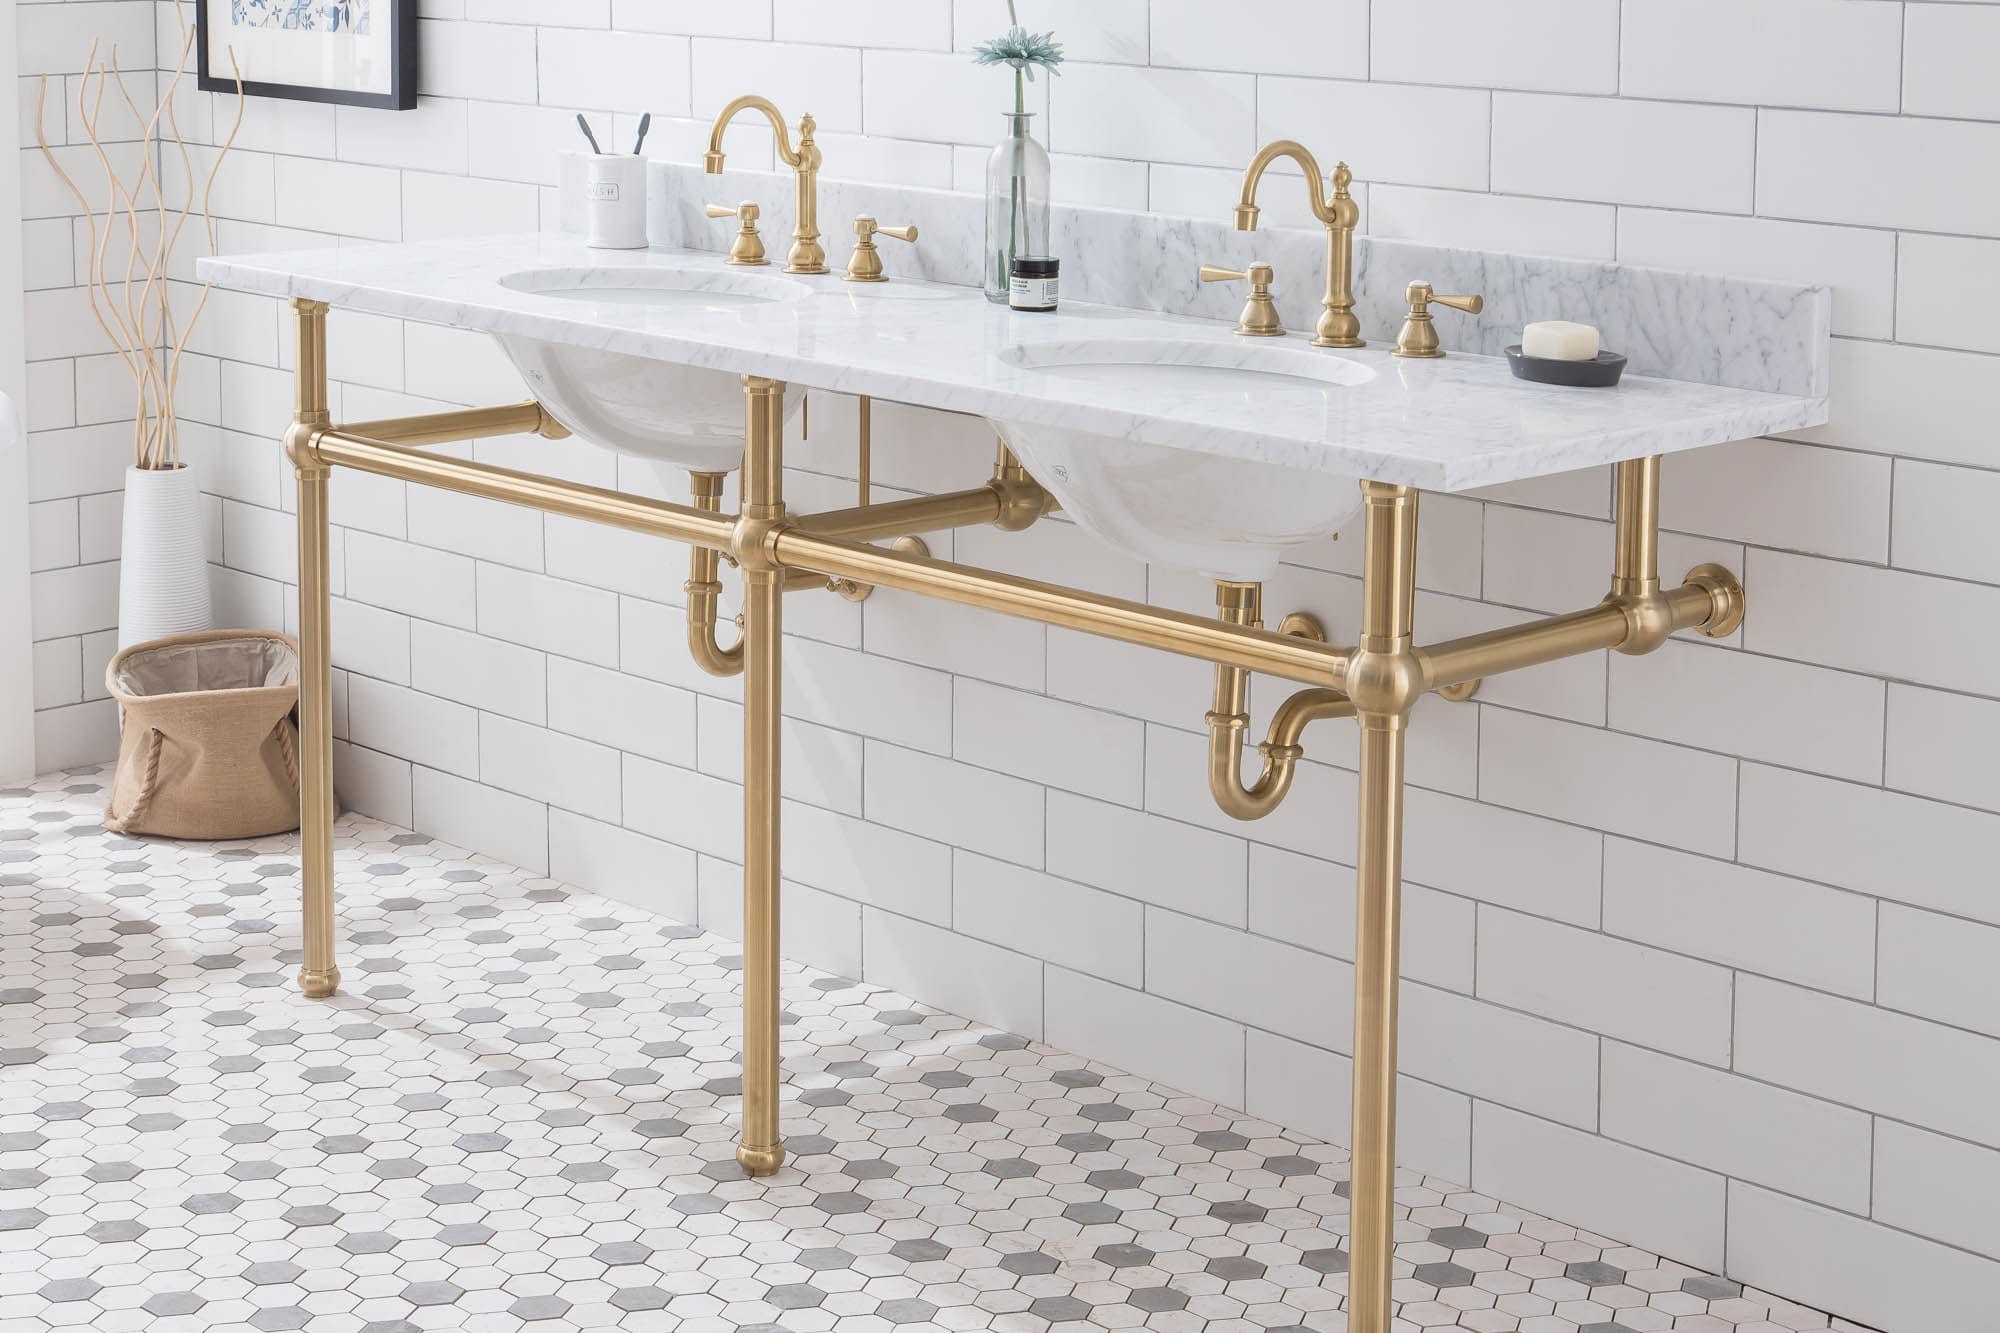 Embassy 72 Inch Wide Double Wash Stand, P-Trap, Counter Top with Basin, and F2-0012 Faucet included in Satin Gold Finish - Molaix732030762398EB72D-0612